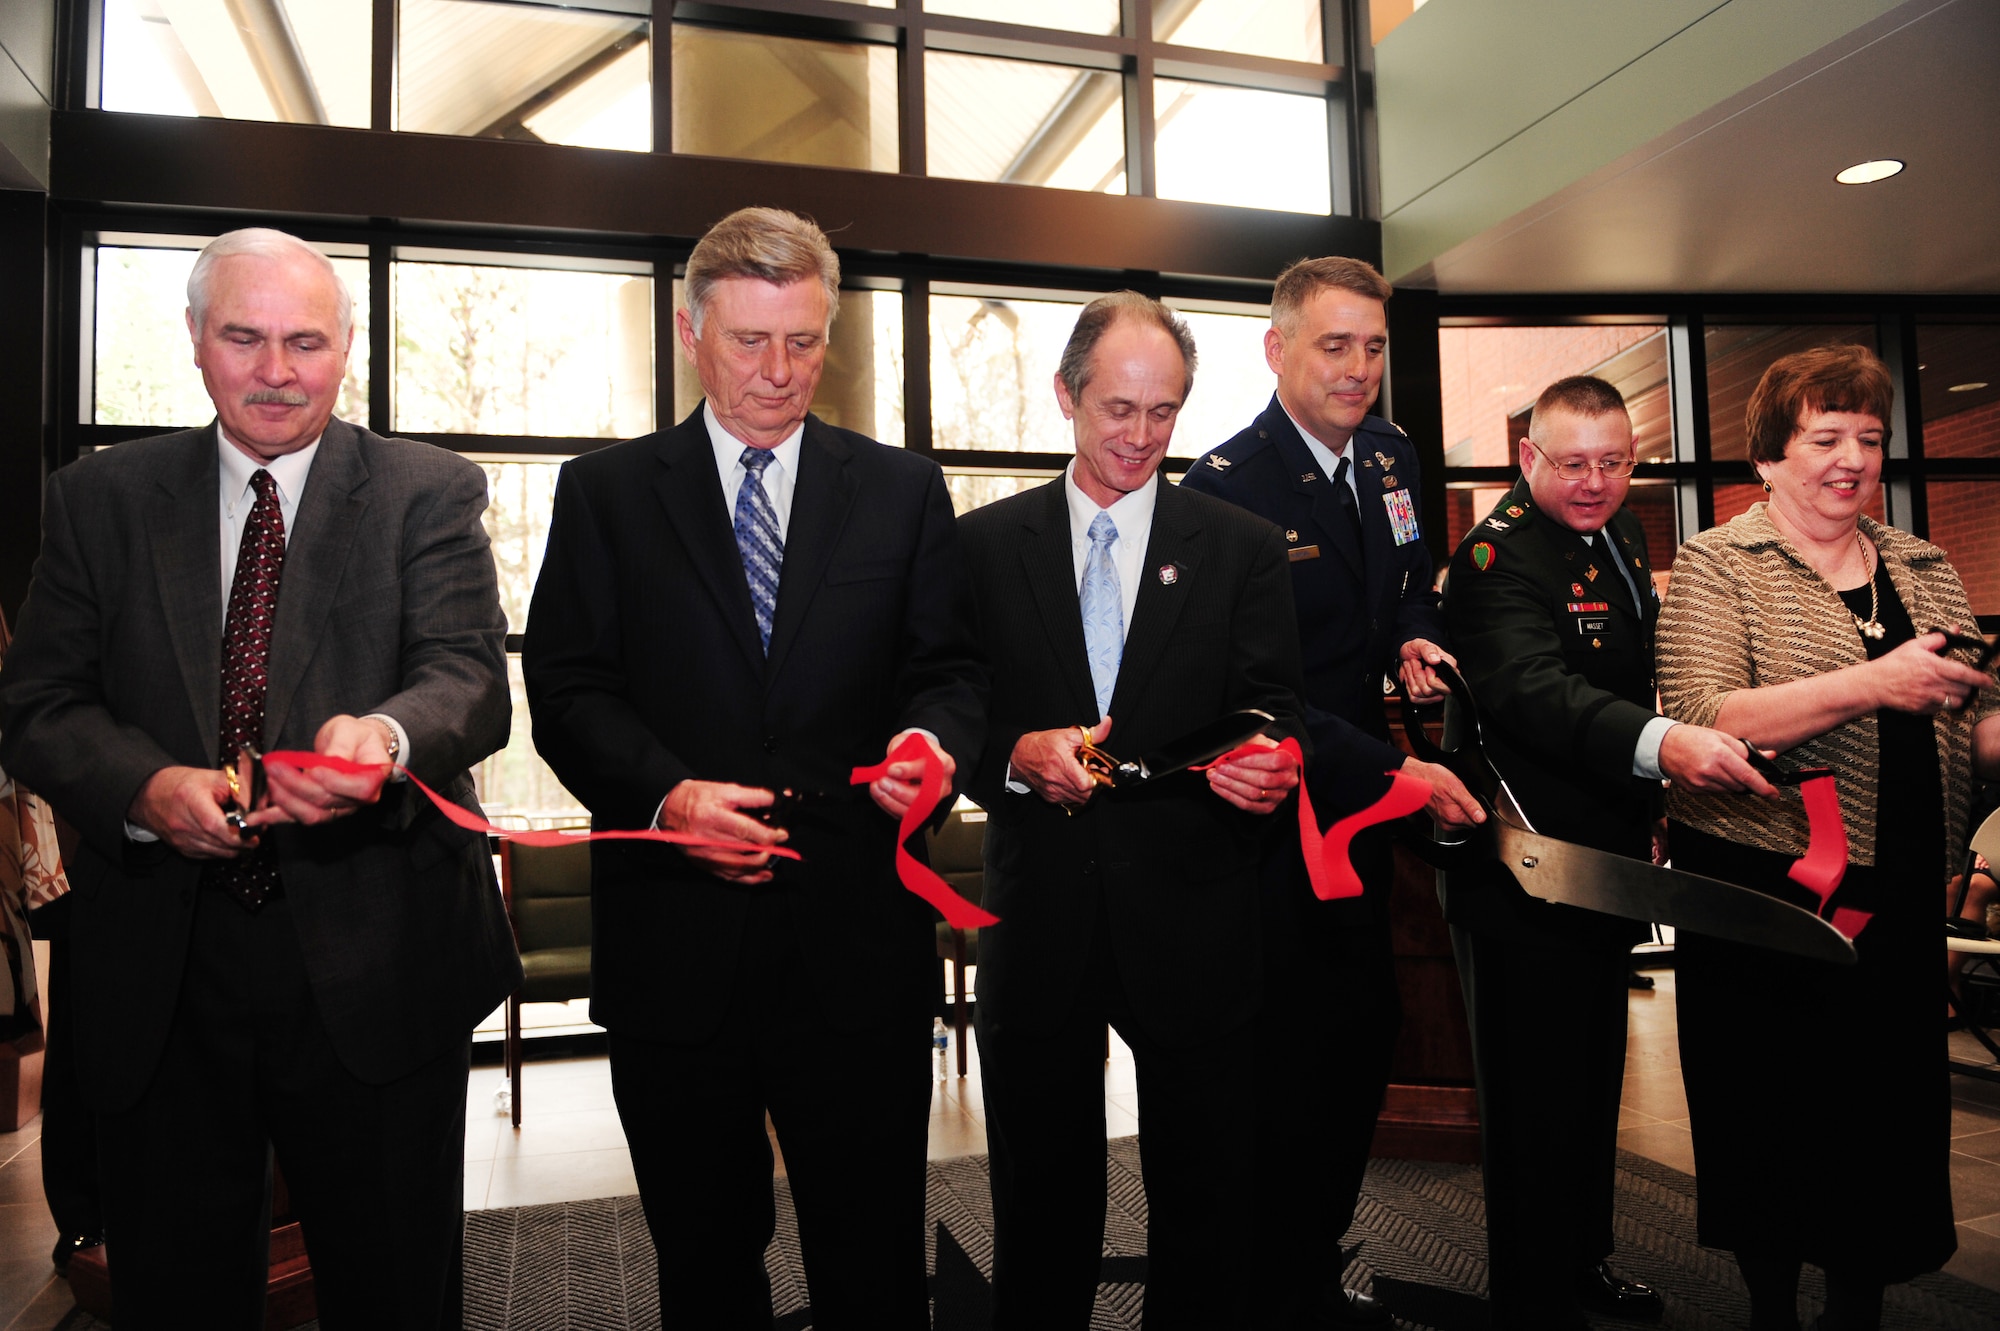 Tommy Swaim, former mayor of Jacksonville; Arkansas Governor Mike Beebe; Jacksonville Mayor Gary Fletcher; Col. Mike Minihan, 19th Airlift Wing commander; U.S. Army Col. Glen Masset, Army Corps of Engineer Little Rock district commander; and Melody Toney, 19th Force Support Squadron base education officer, cut the ribbon for the grand opening of the Jacksonville-Little Rock Air Force Base University Center Feb. 1, 2011, at Little Rock Air Force Base, Ark. The facility is the culmination of the city of Jacksonville’s hard work, the efforts of government and community leaders, and the U.S. Air Force’s need for a modern facility. (Photo by U.S. Air Force Senior Airman Jim Araos)